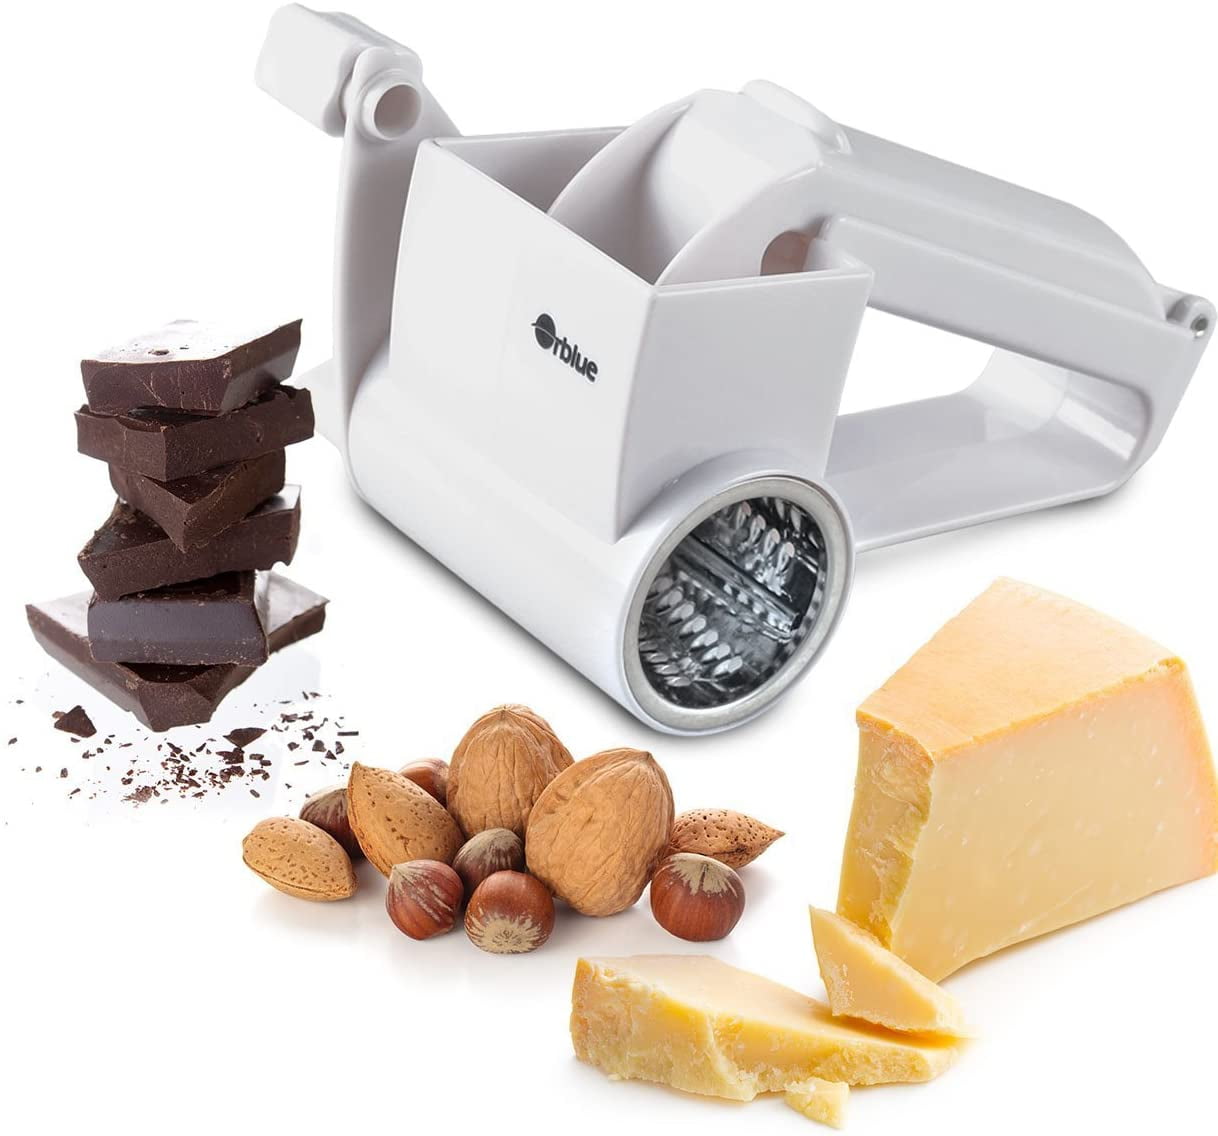 MASTERTOP Cheese Grater,Handheld Rotary Cheese Graters with 2 Stainless  Steel Drums,Kitchen Grater for Hard Cheese, Vegetables,Nuts,Chocolate